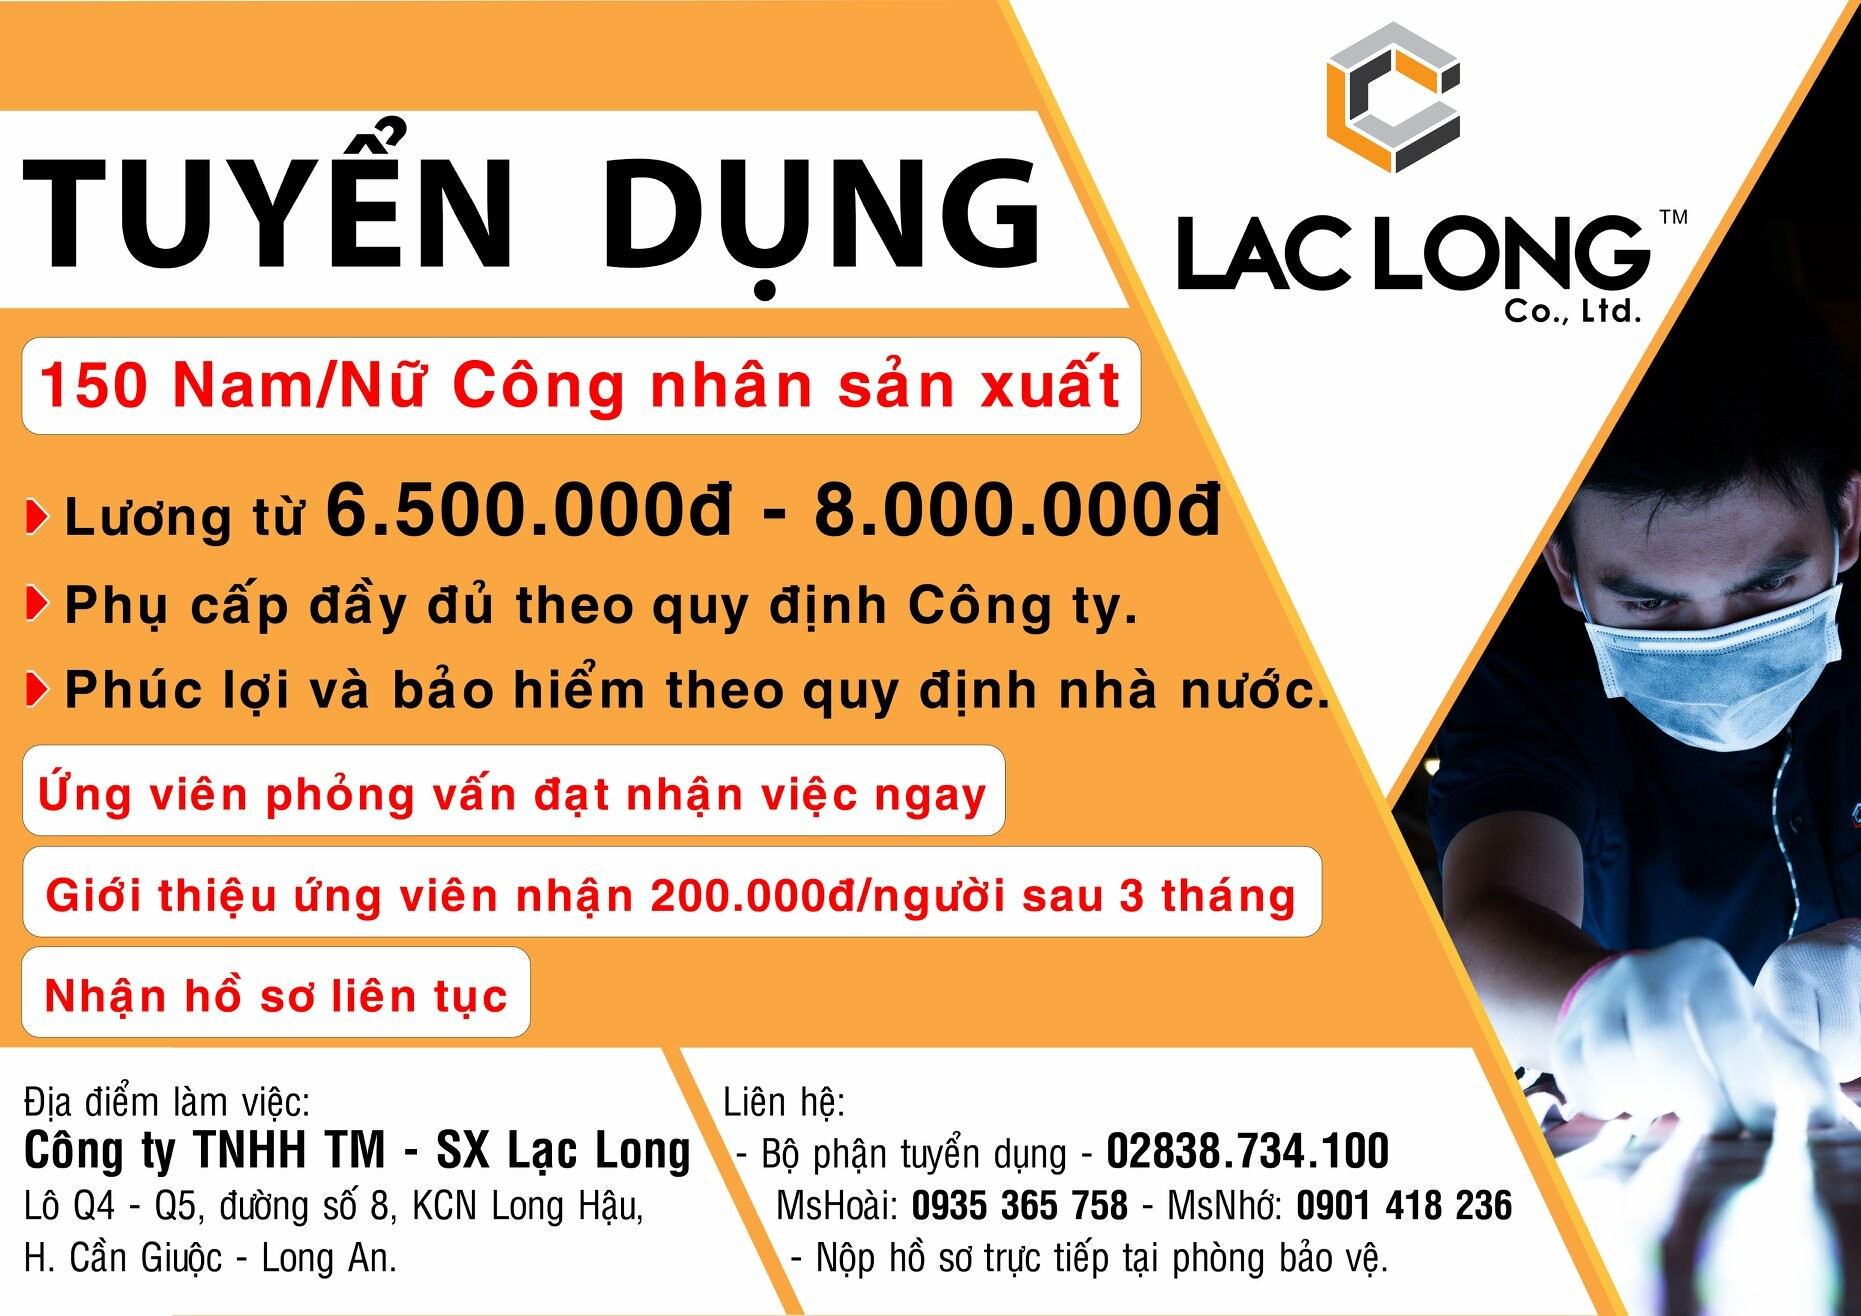 Cover image for LAC LONG CO., LTD